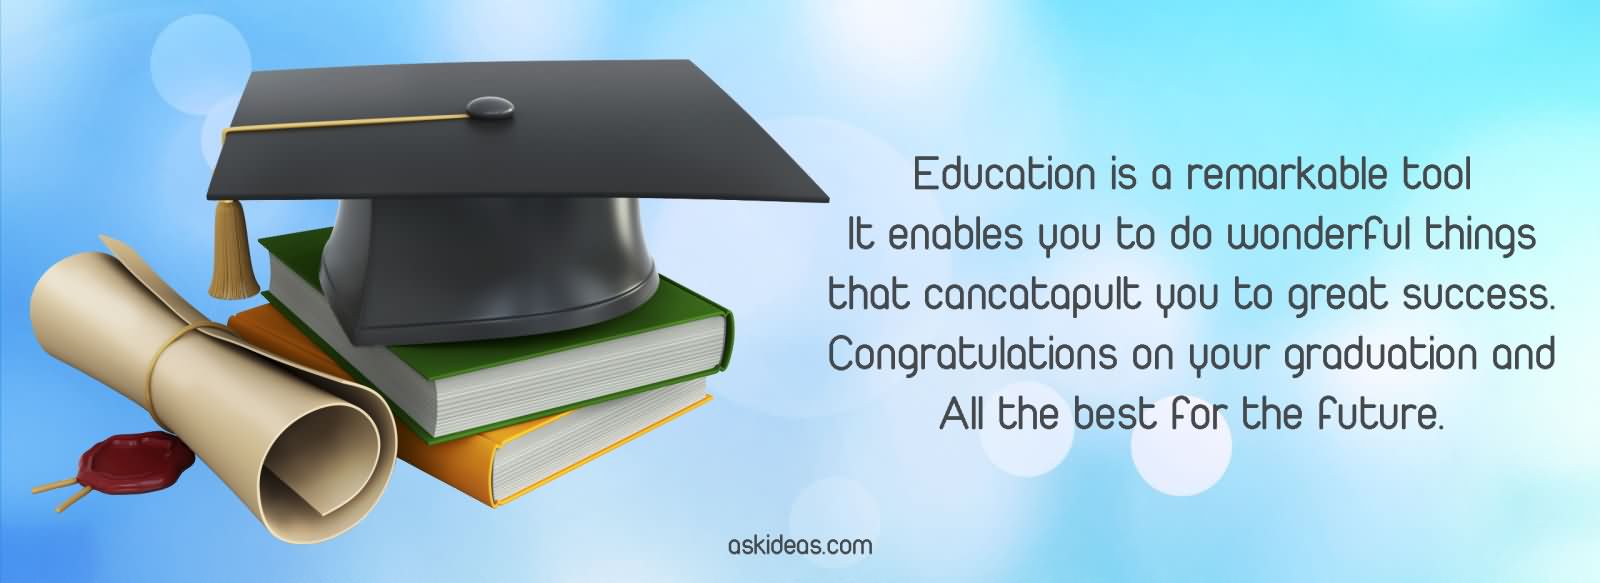 Education is a remarkable tool – It enables you to do wonderful things that can catapult you to great success. Congratulations on your graduation and all the best for the future.